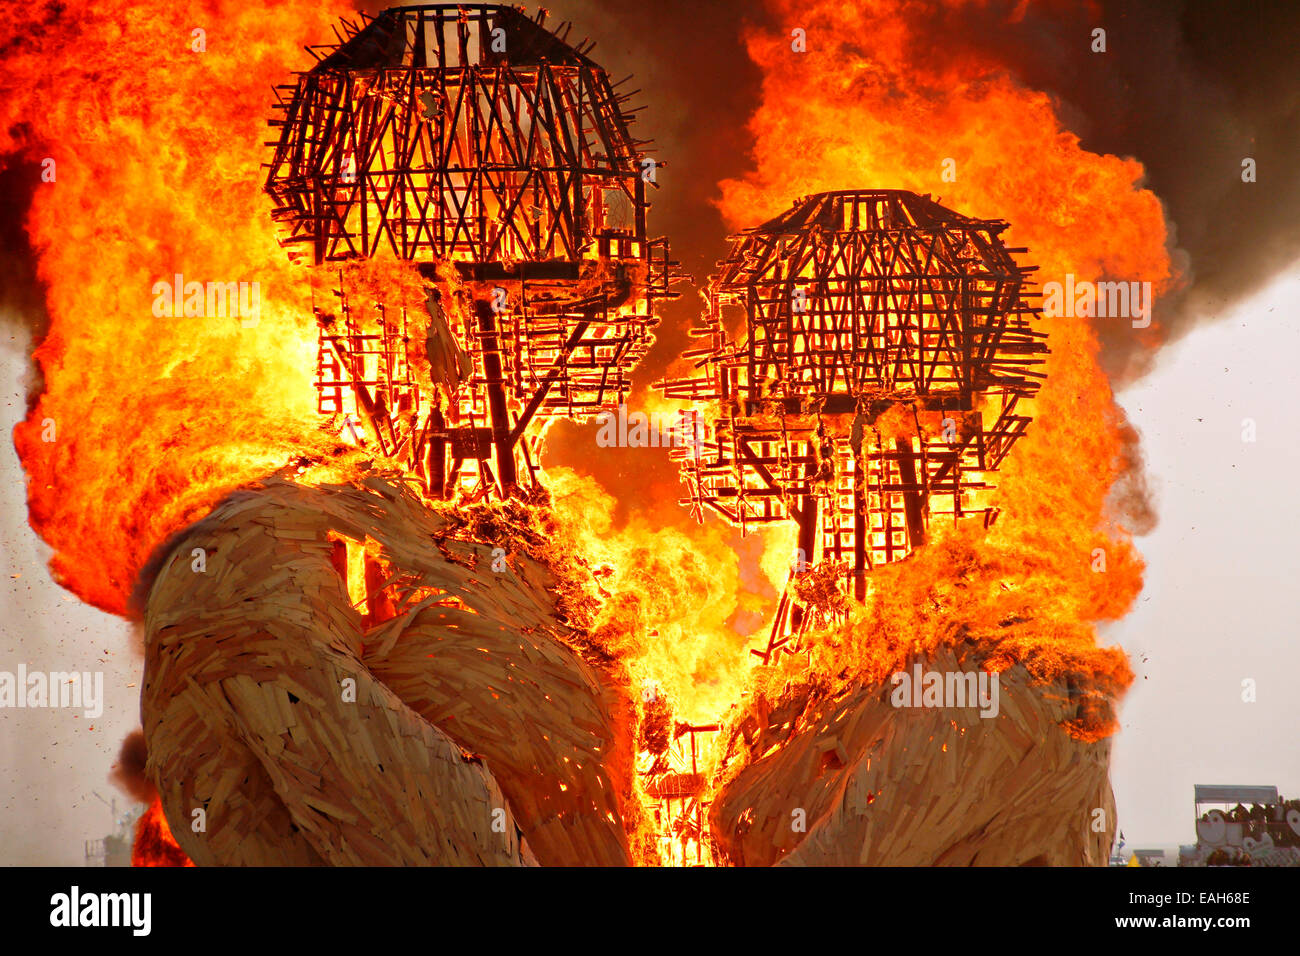 The art installation Embrace is set on fire on the playa at the annual Burning Man festival in the desert August 29, 2014 in Black Rock City, Nevada. Stock Photo